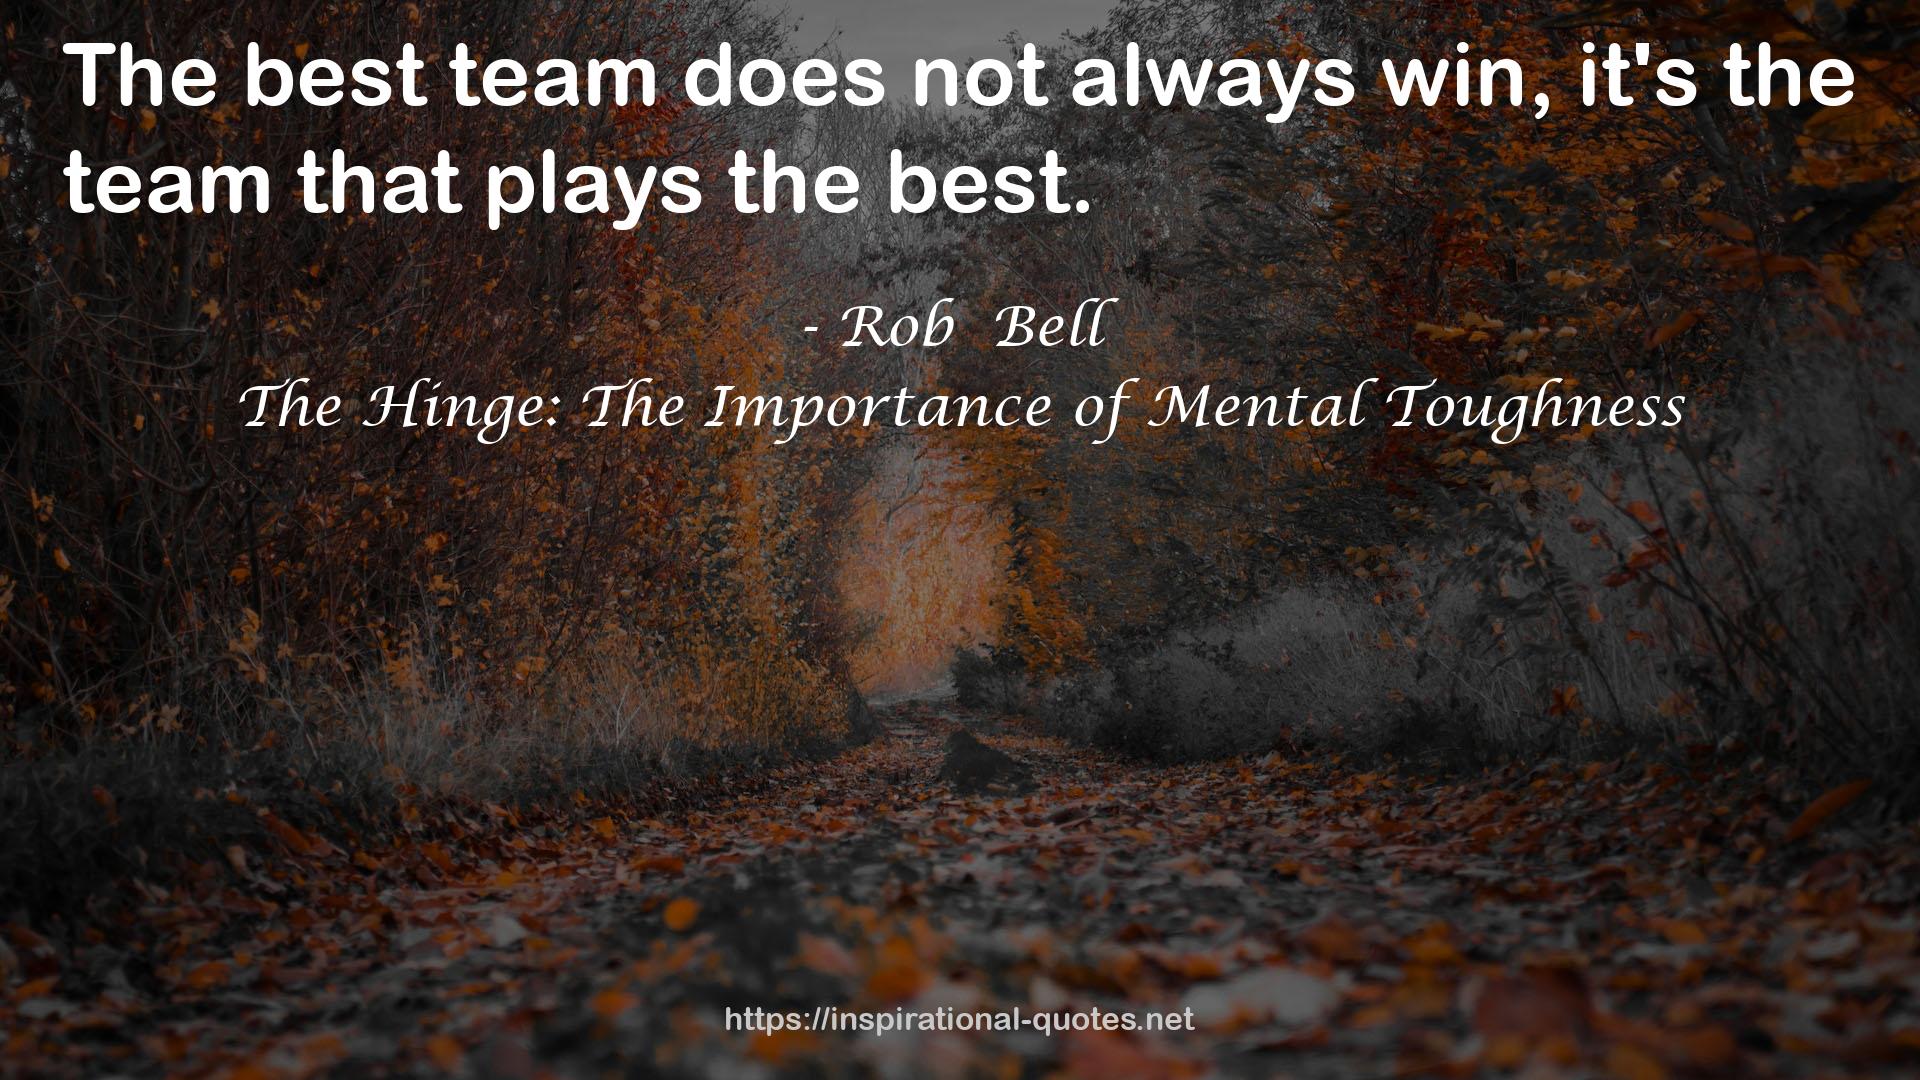 The Hinge: The Importance of Mental Toughness QUOTES